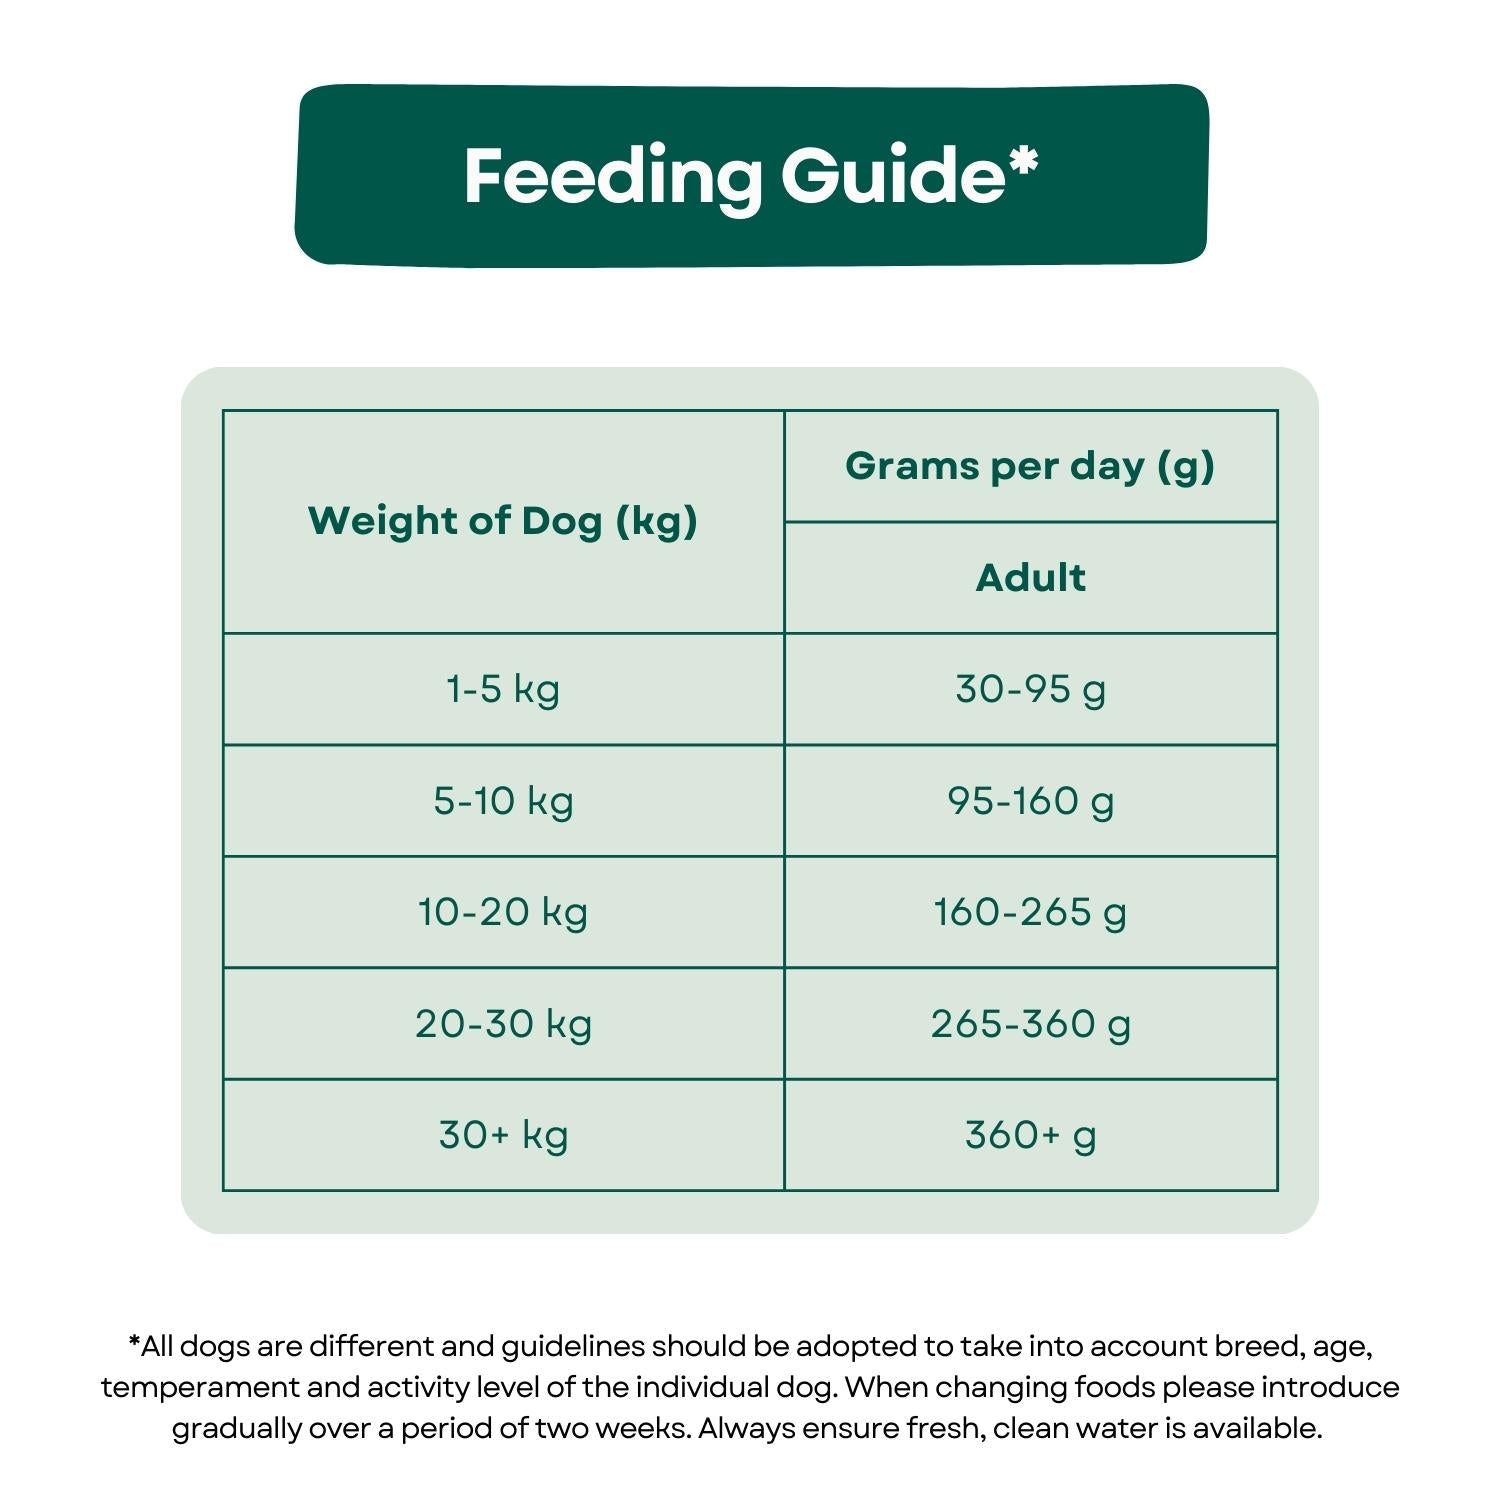 Feeding Guide Super Premium Adult No Added Grain or Cereal Dog Food - Duck & Potato